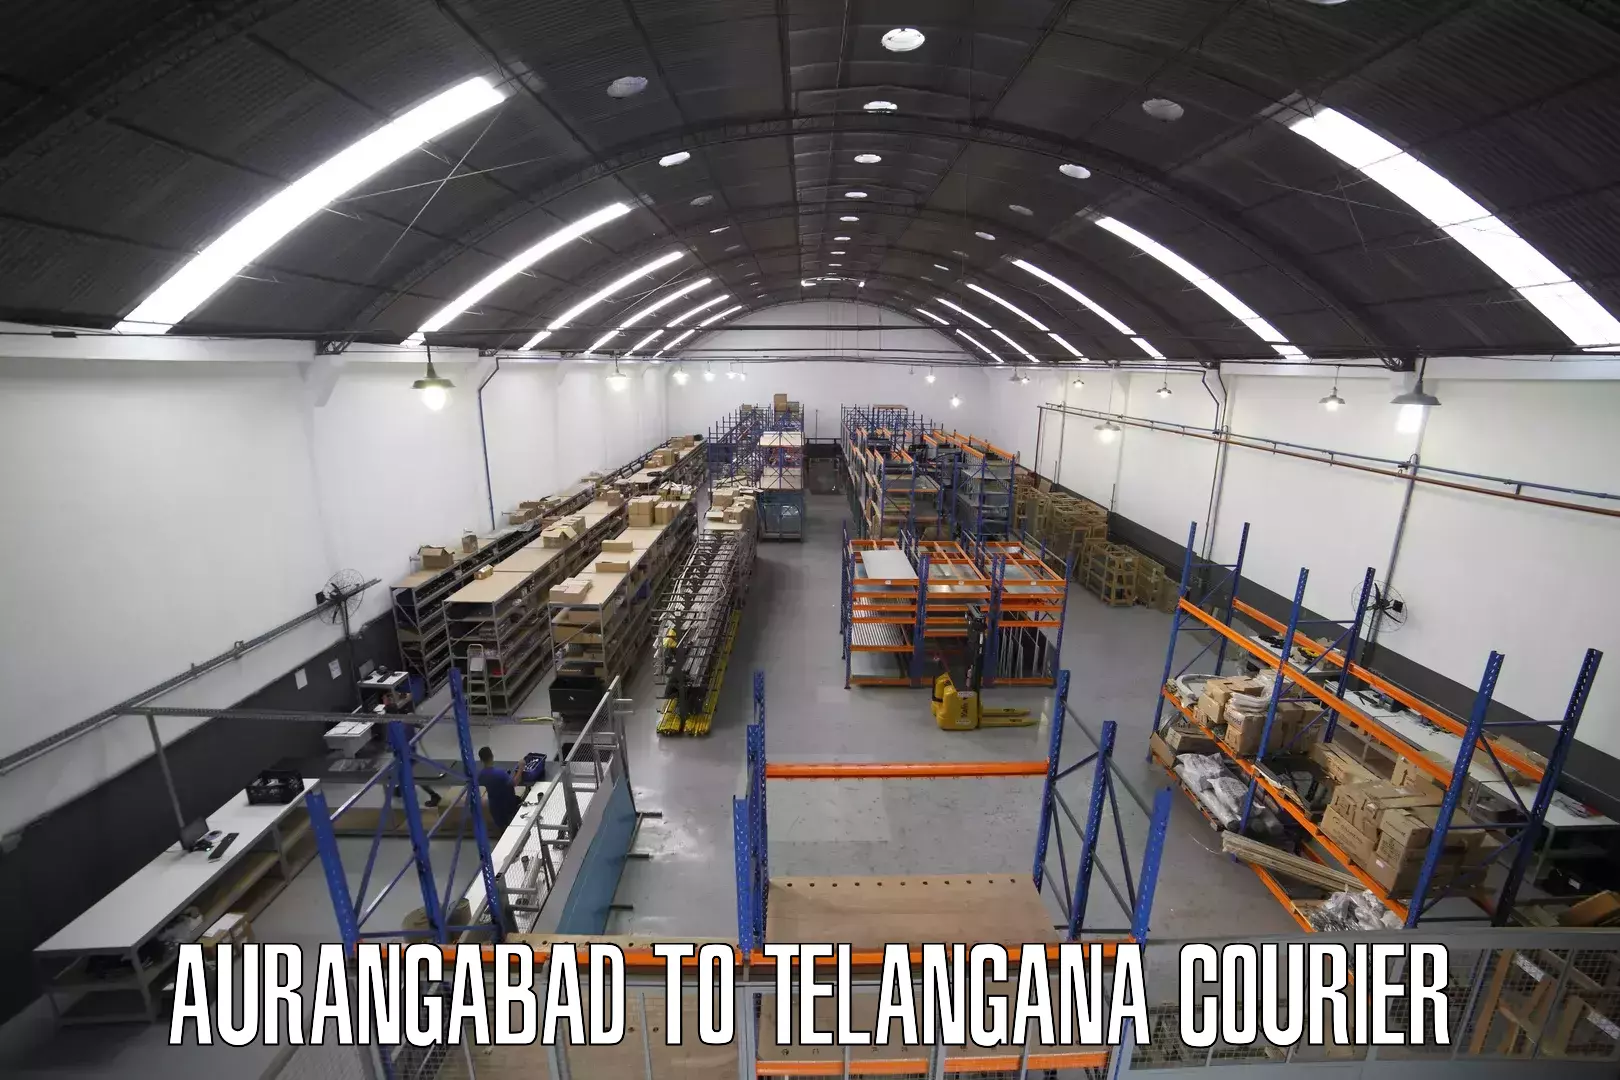 Reliable delivery network Aurangabad to Telangana